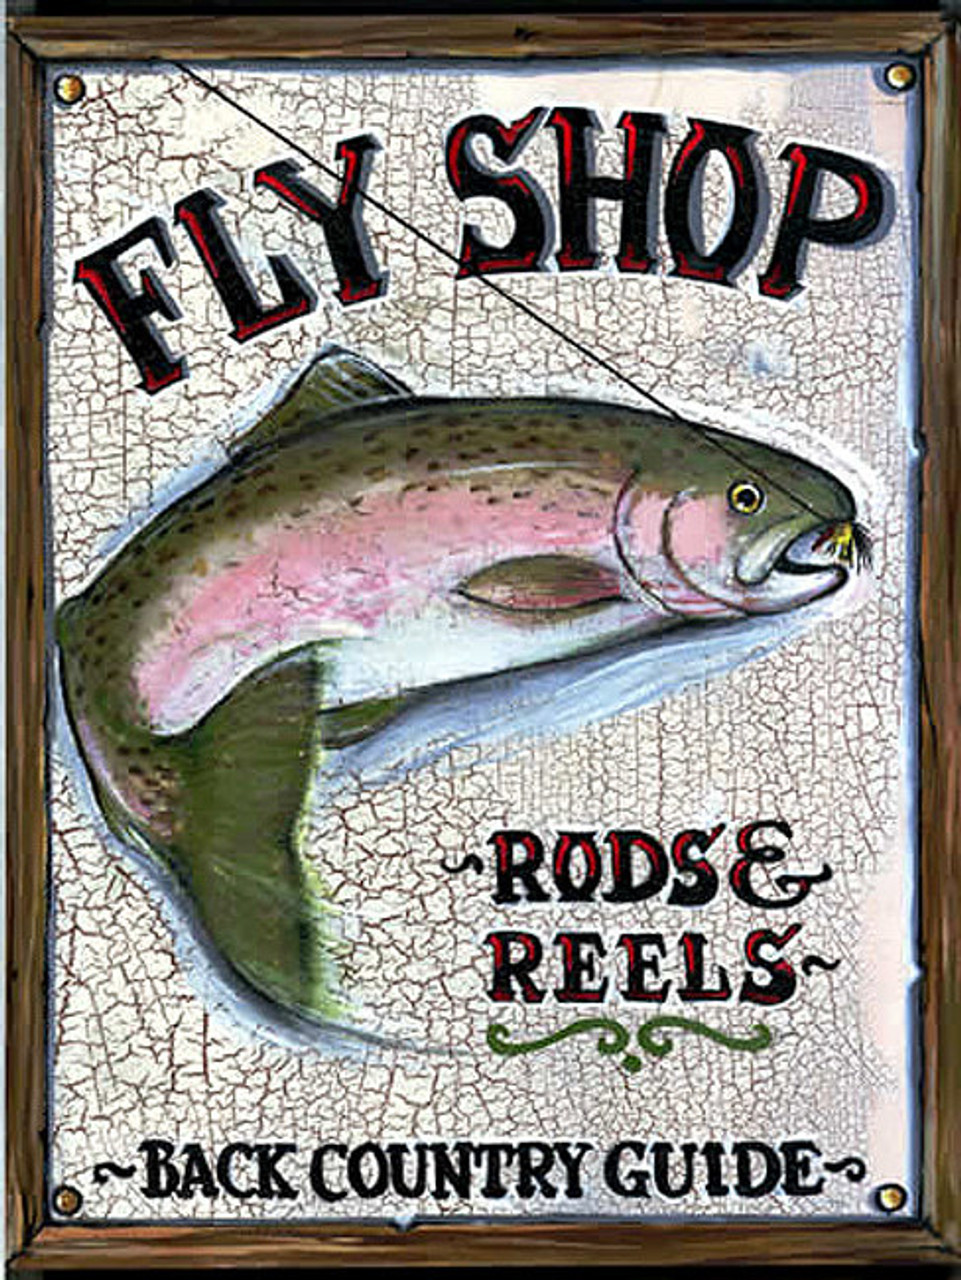 Vintage Fly Shop Sign, Rods and Reels